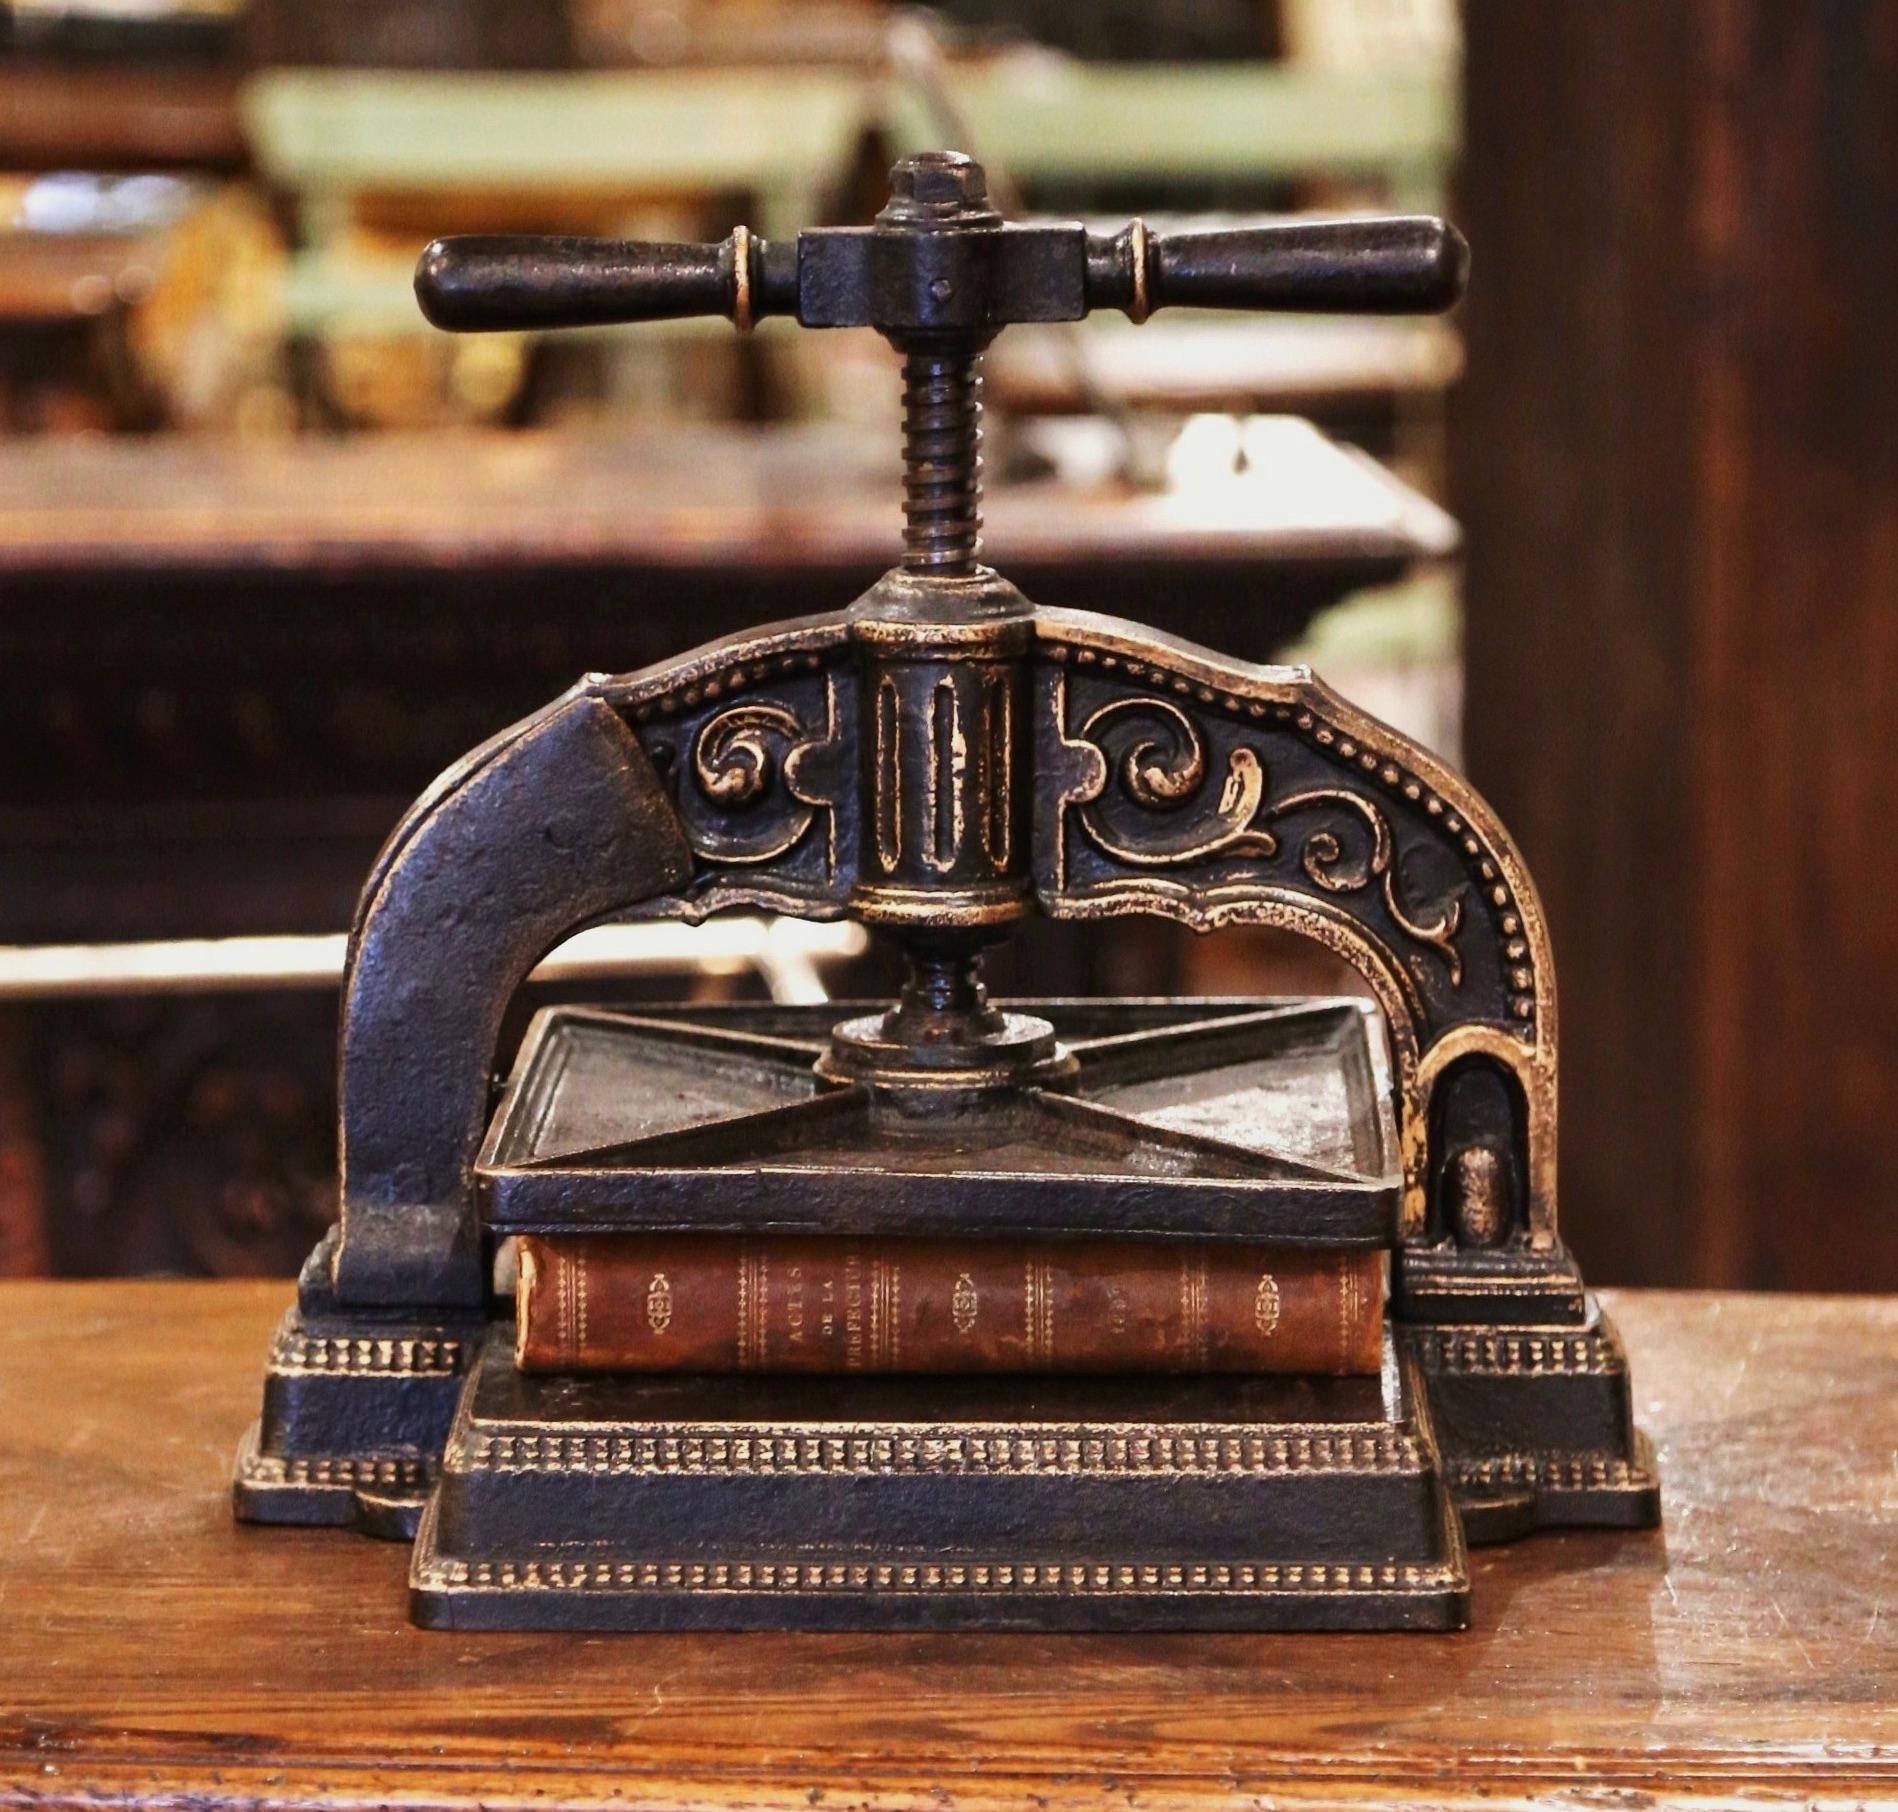 This beautiful paper binding press was forged in France, circa 1860. The Classic 